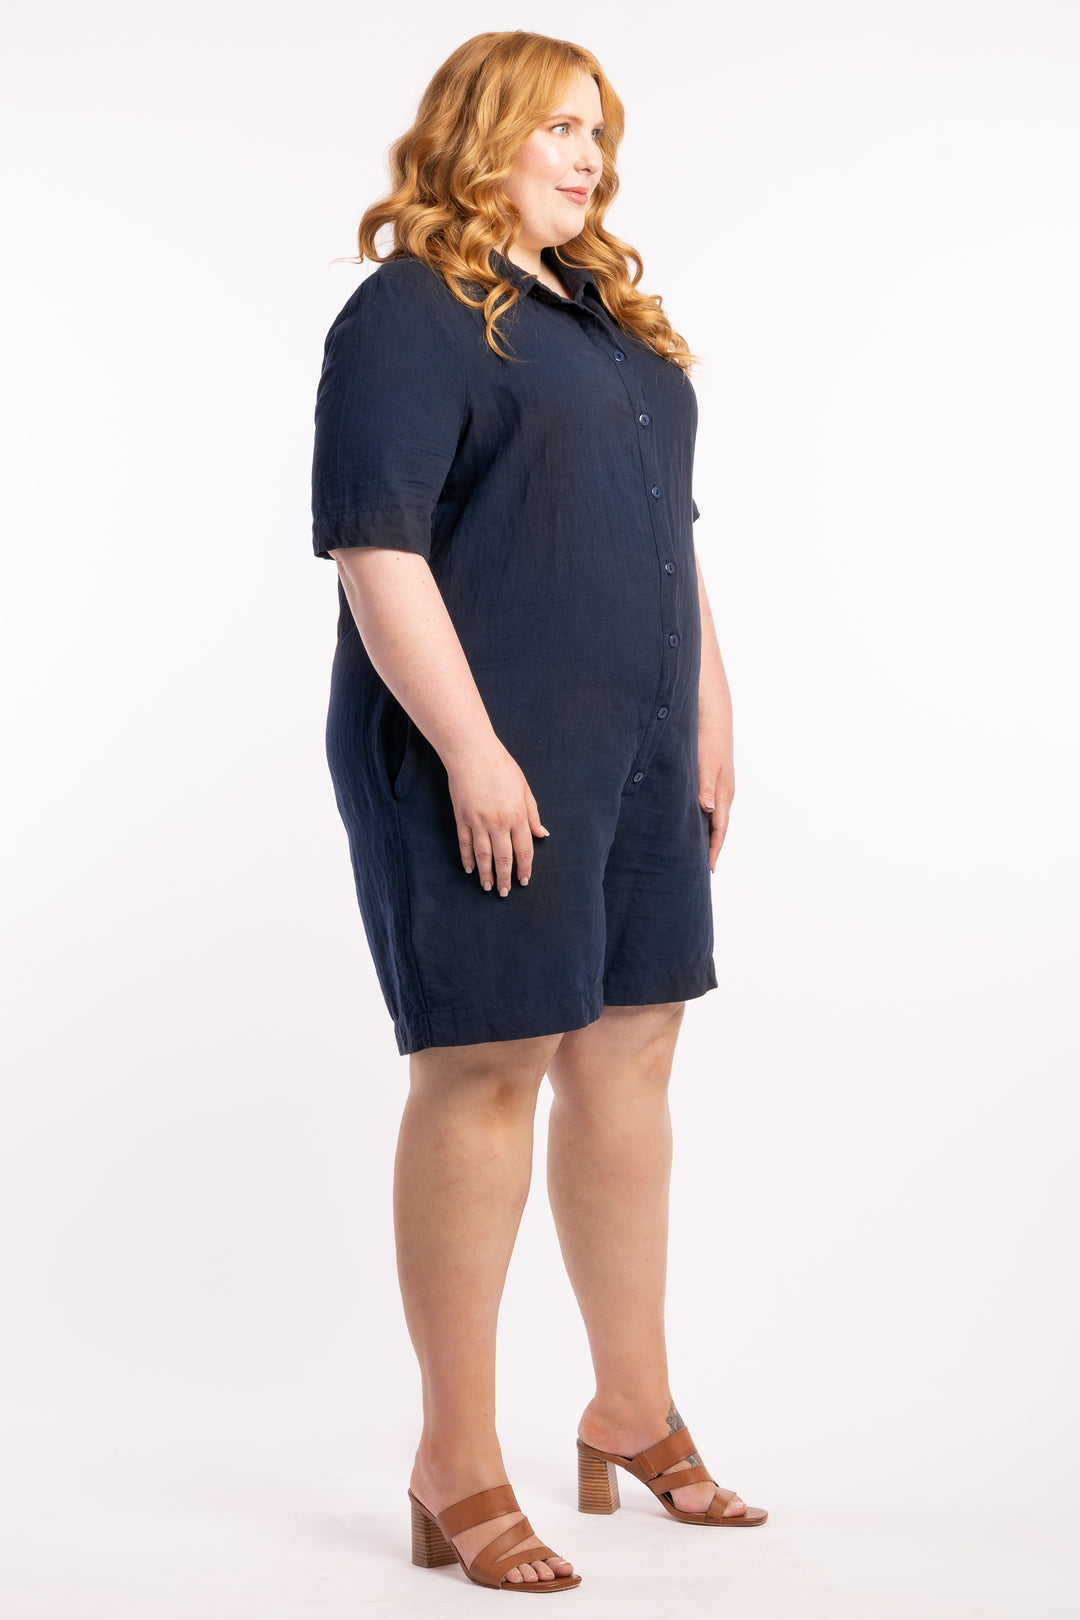 Jump For My Love Jumpsuit - Navy -  LAST ONE - SIZE S (14/16)